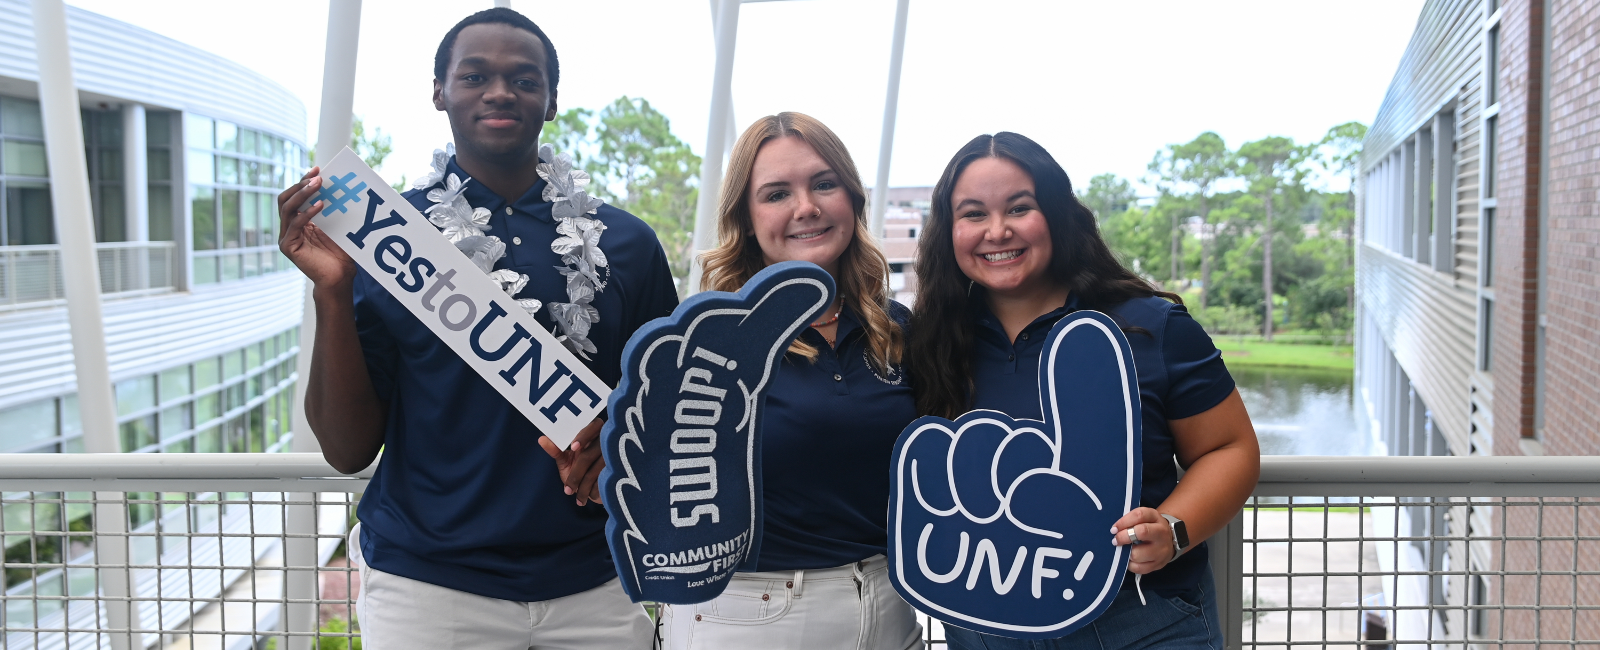 Three UNF workers holding UNF foam fingers and #YestoUNF sign and smiling